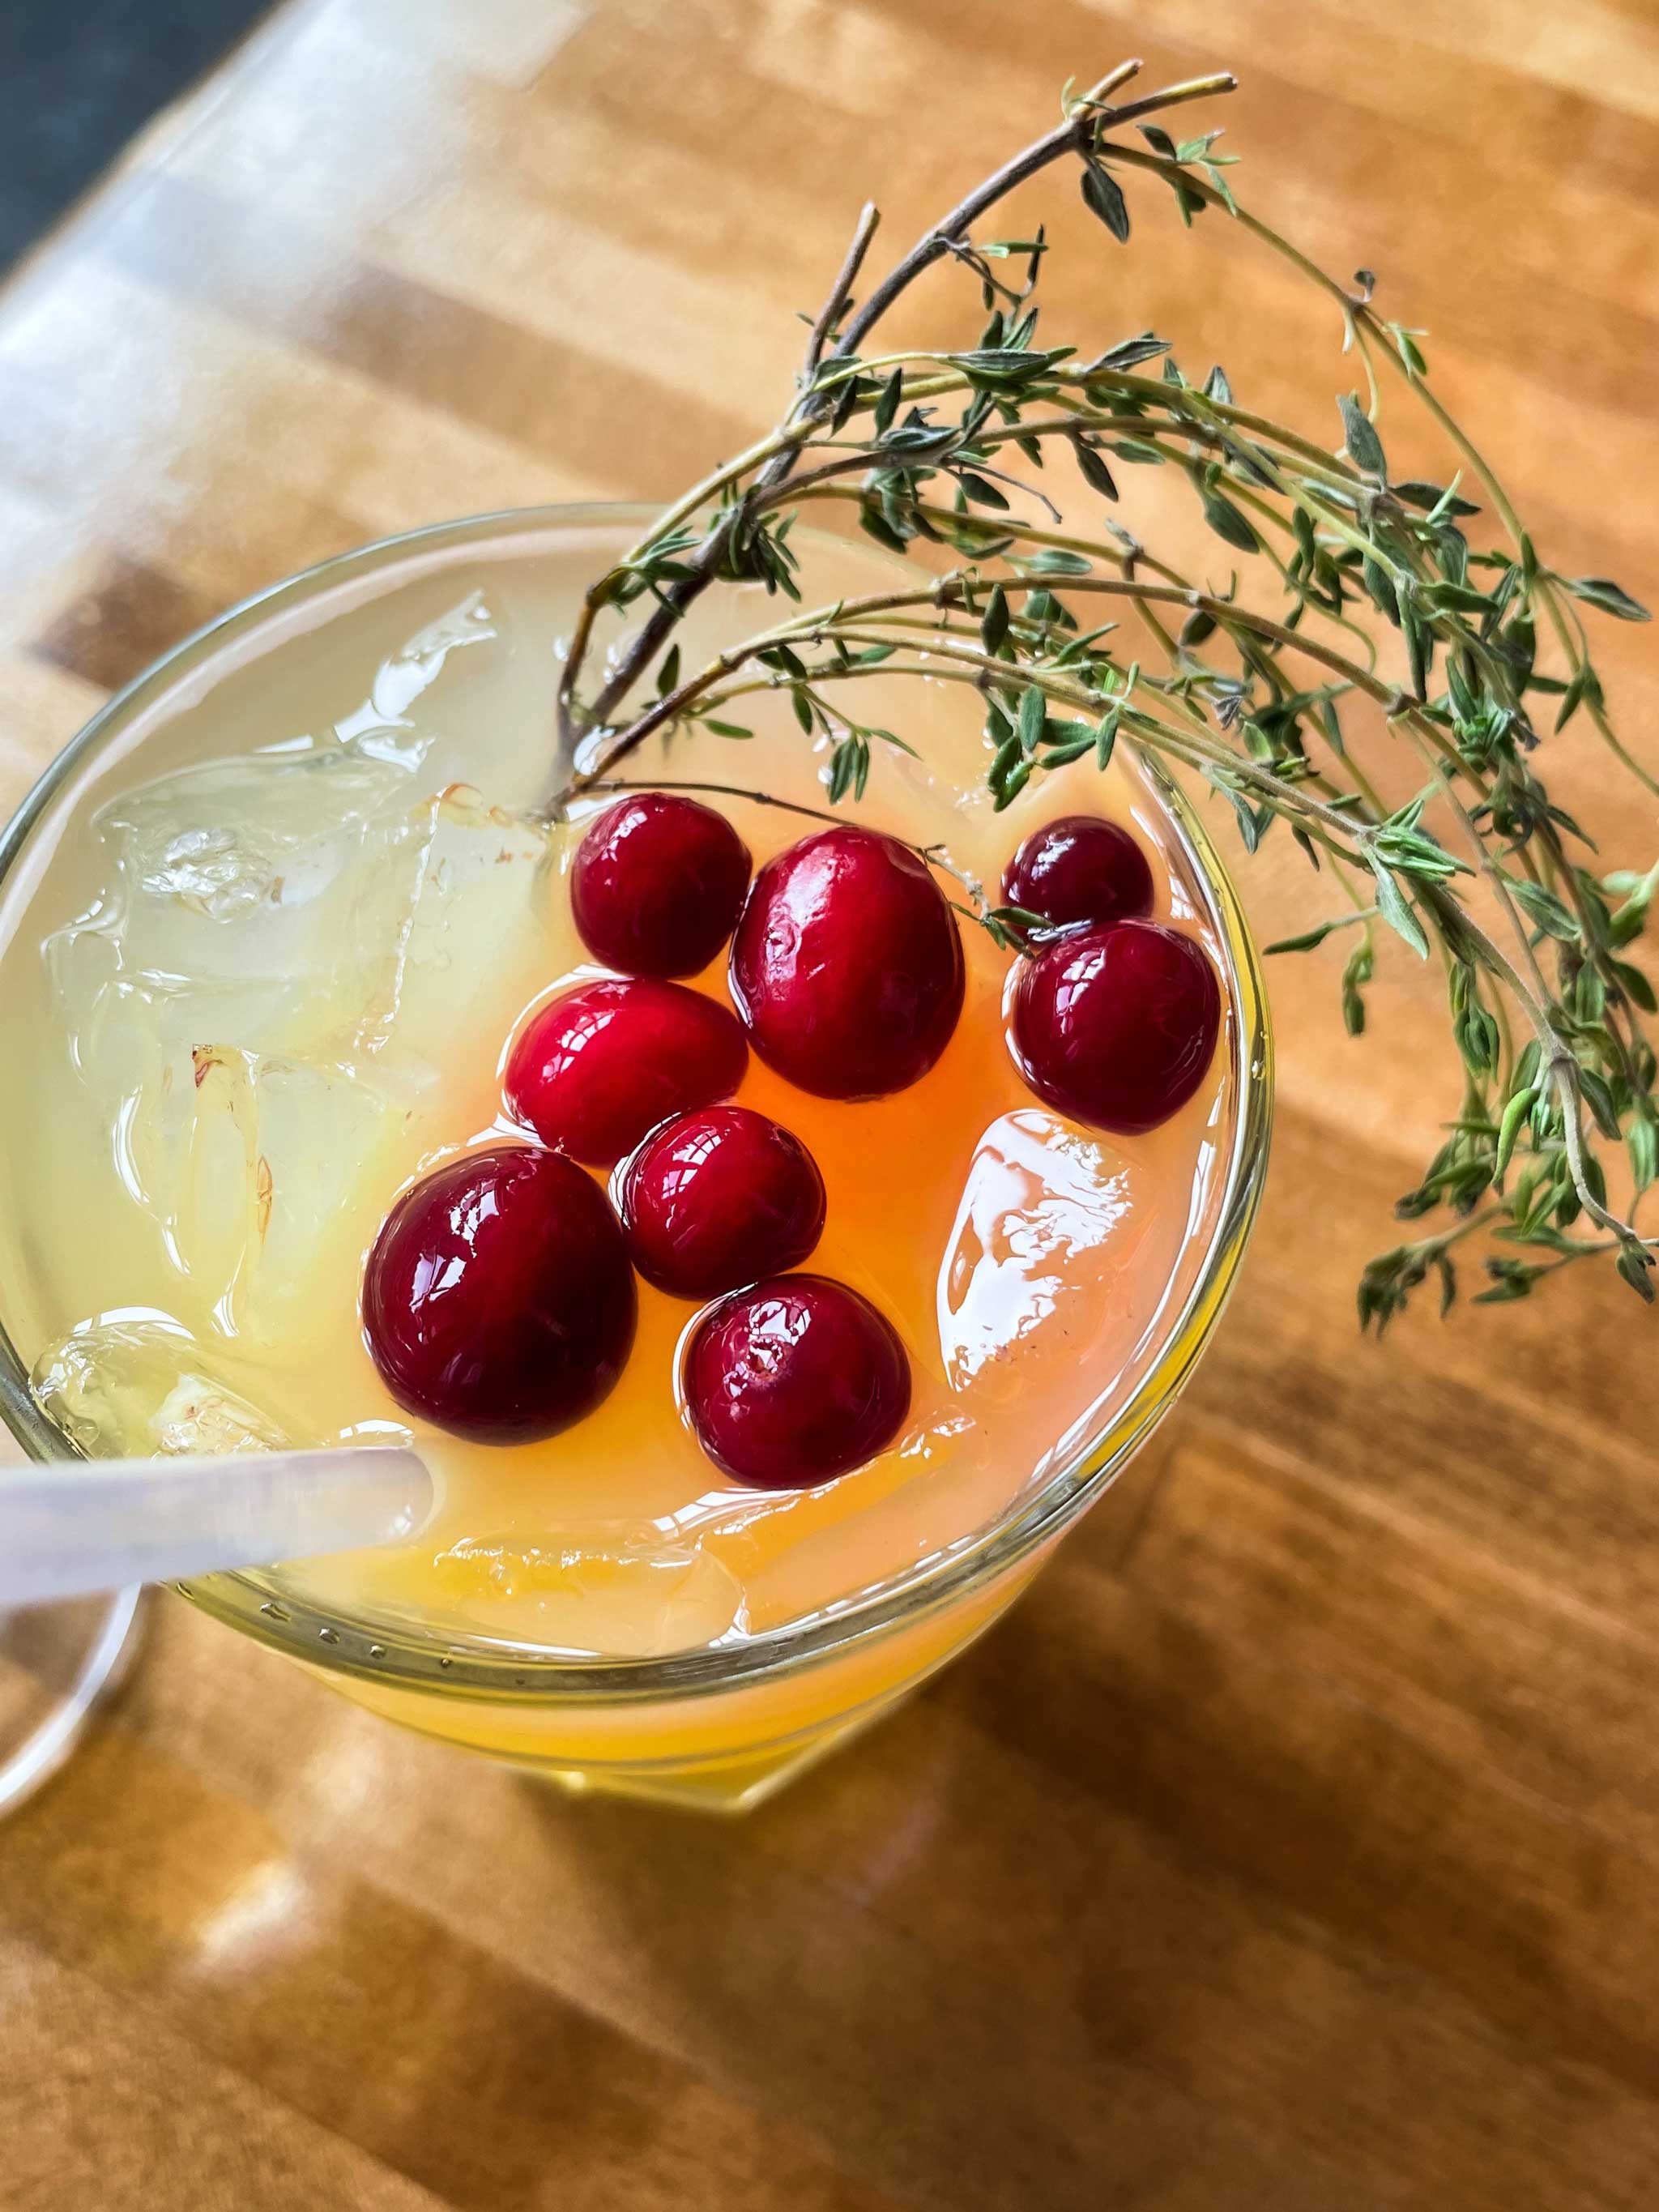 Bullwinkle's Golden Road craft cocktail